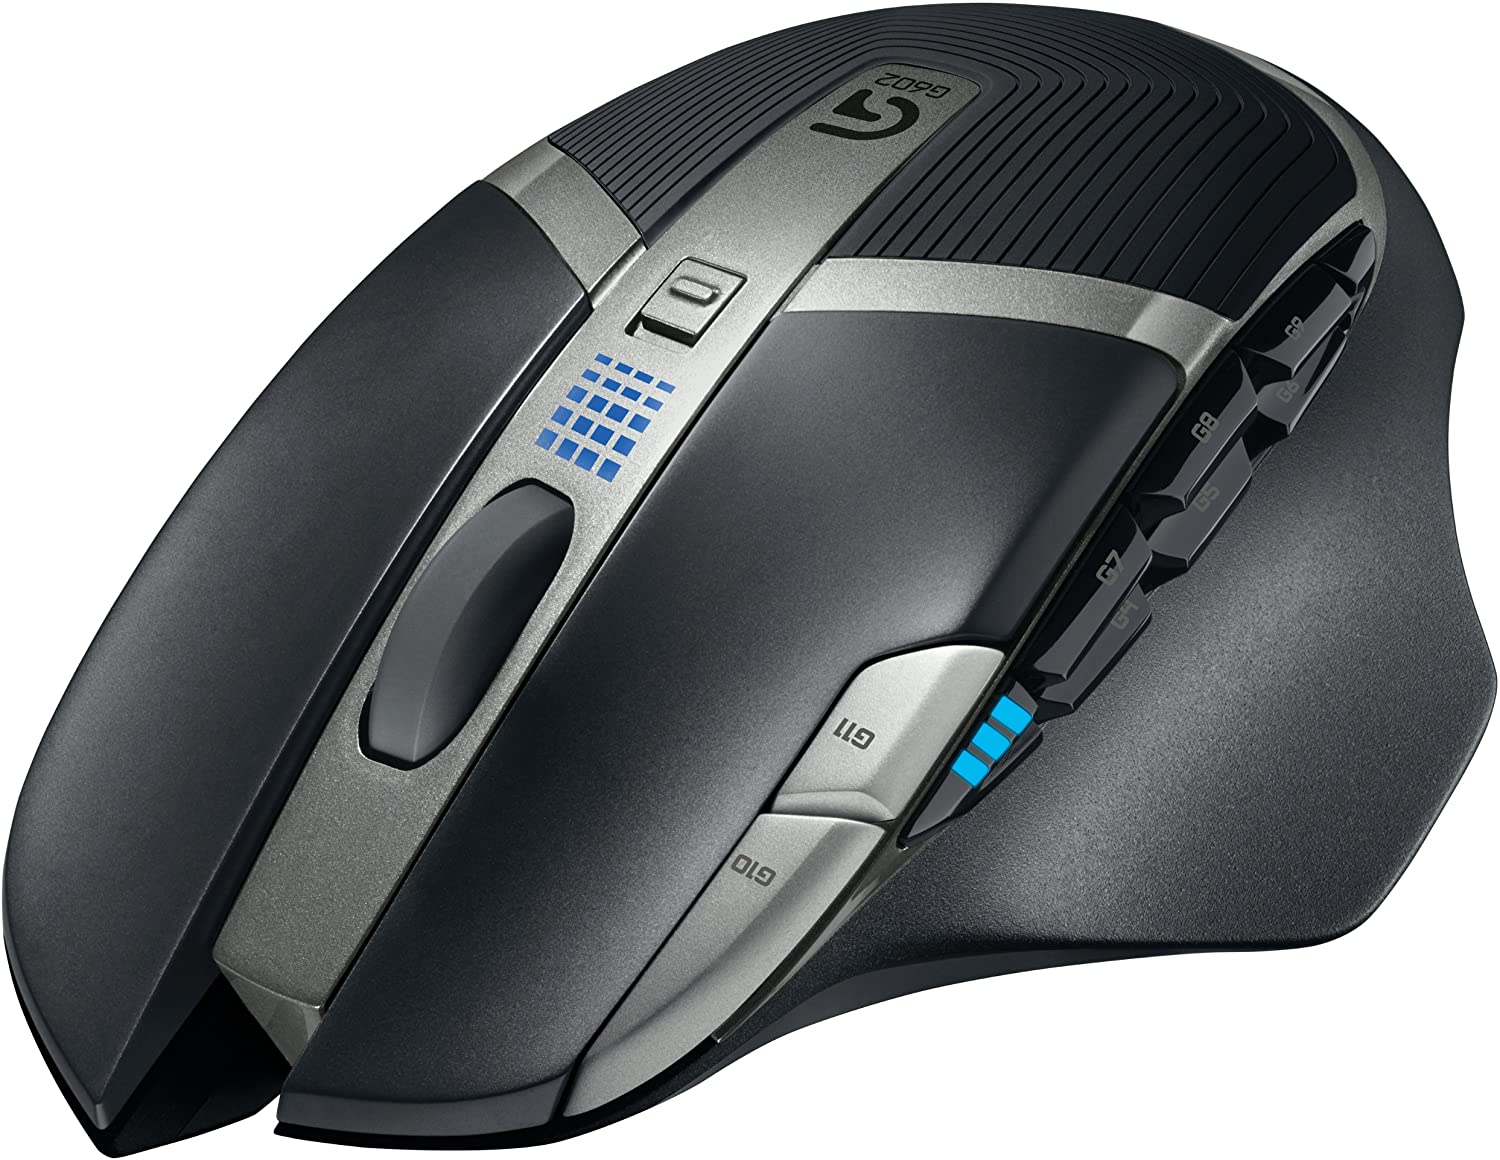 Logitech G602 Lag-Free Wireless Gaming Mouse